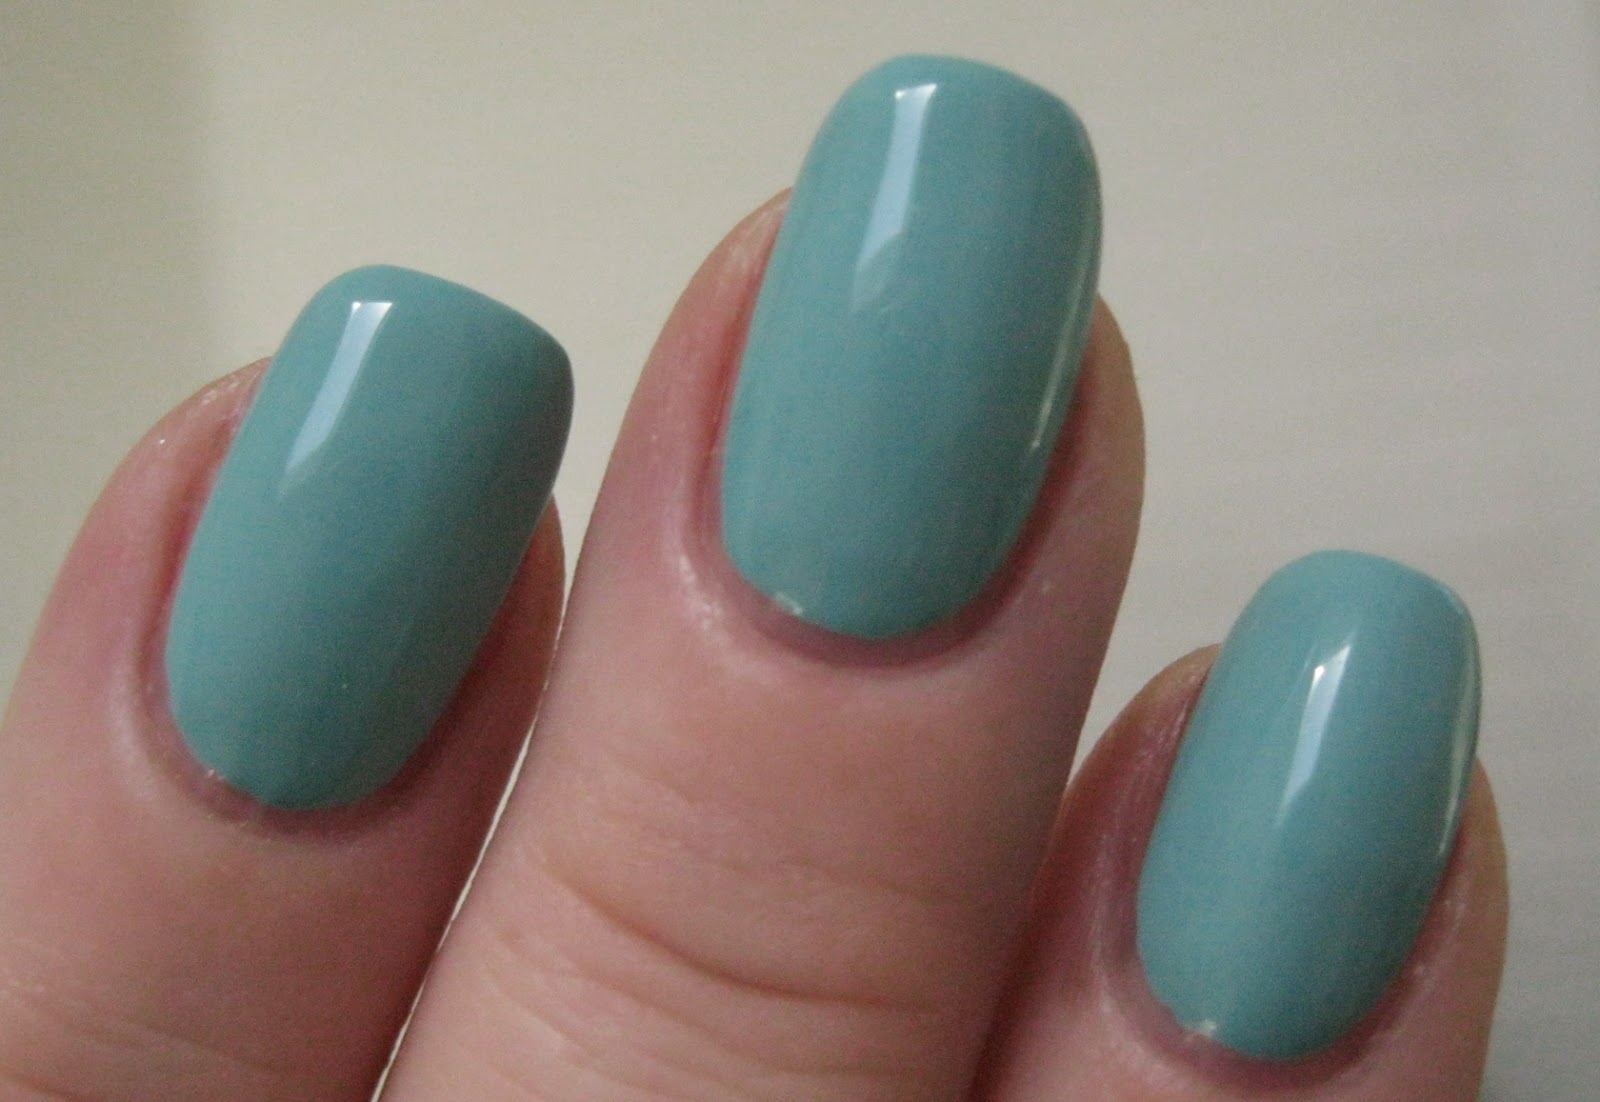 4. China Glaze Nail Lacquer in "For Audrey" - wide 5